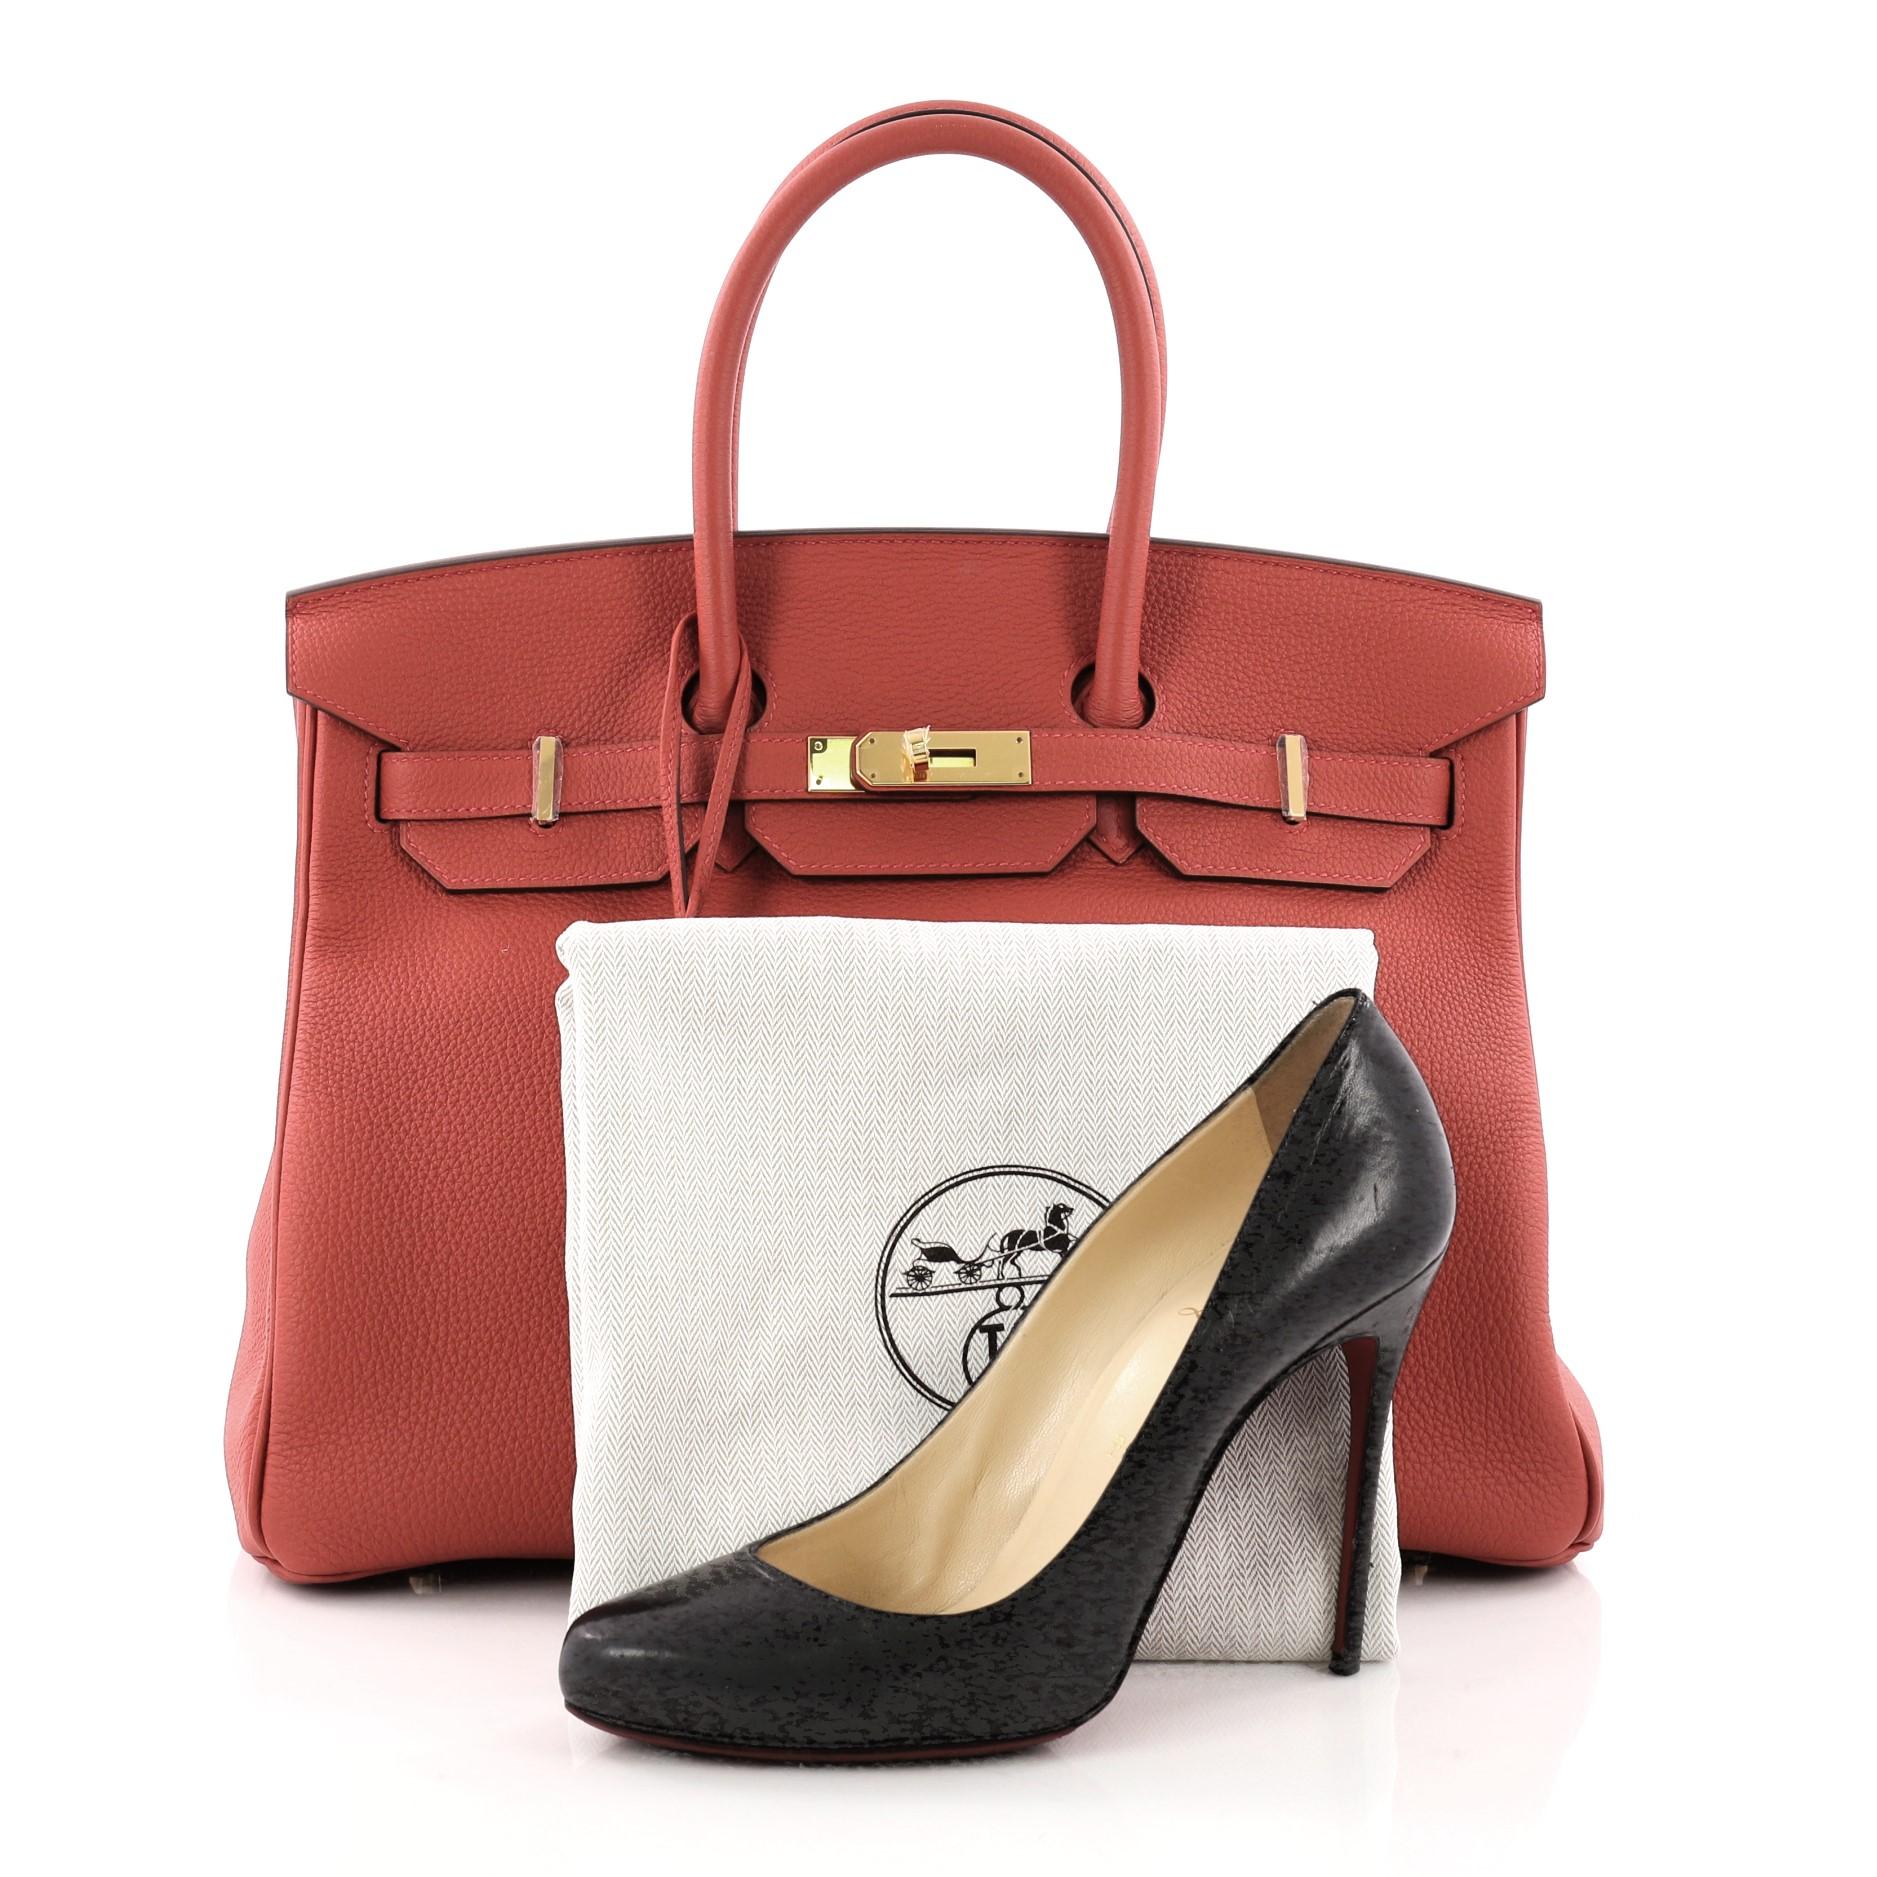 This authentic Hermes Birkin Handbag Rouge Tomate Togo with Gold Hardware 35 is synonymous to traditional Hermes luxury. Crafted with sturdy, scratch-resistant Rouge Tomate Togo leather, this eye-catching luxurious tote is accented with gold